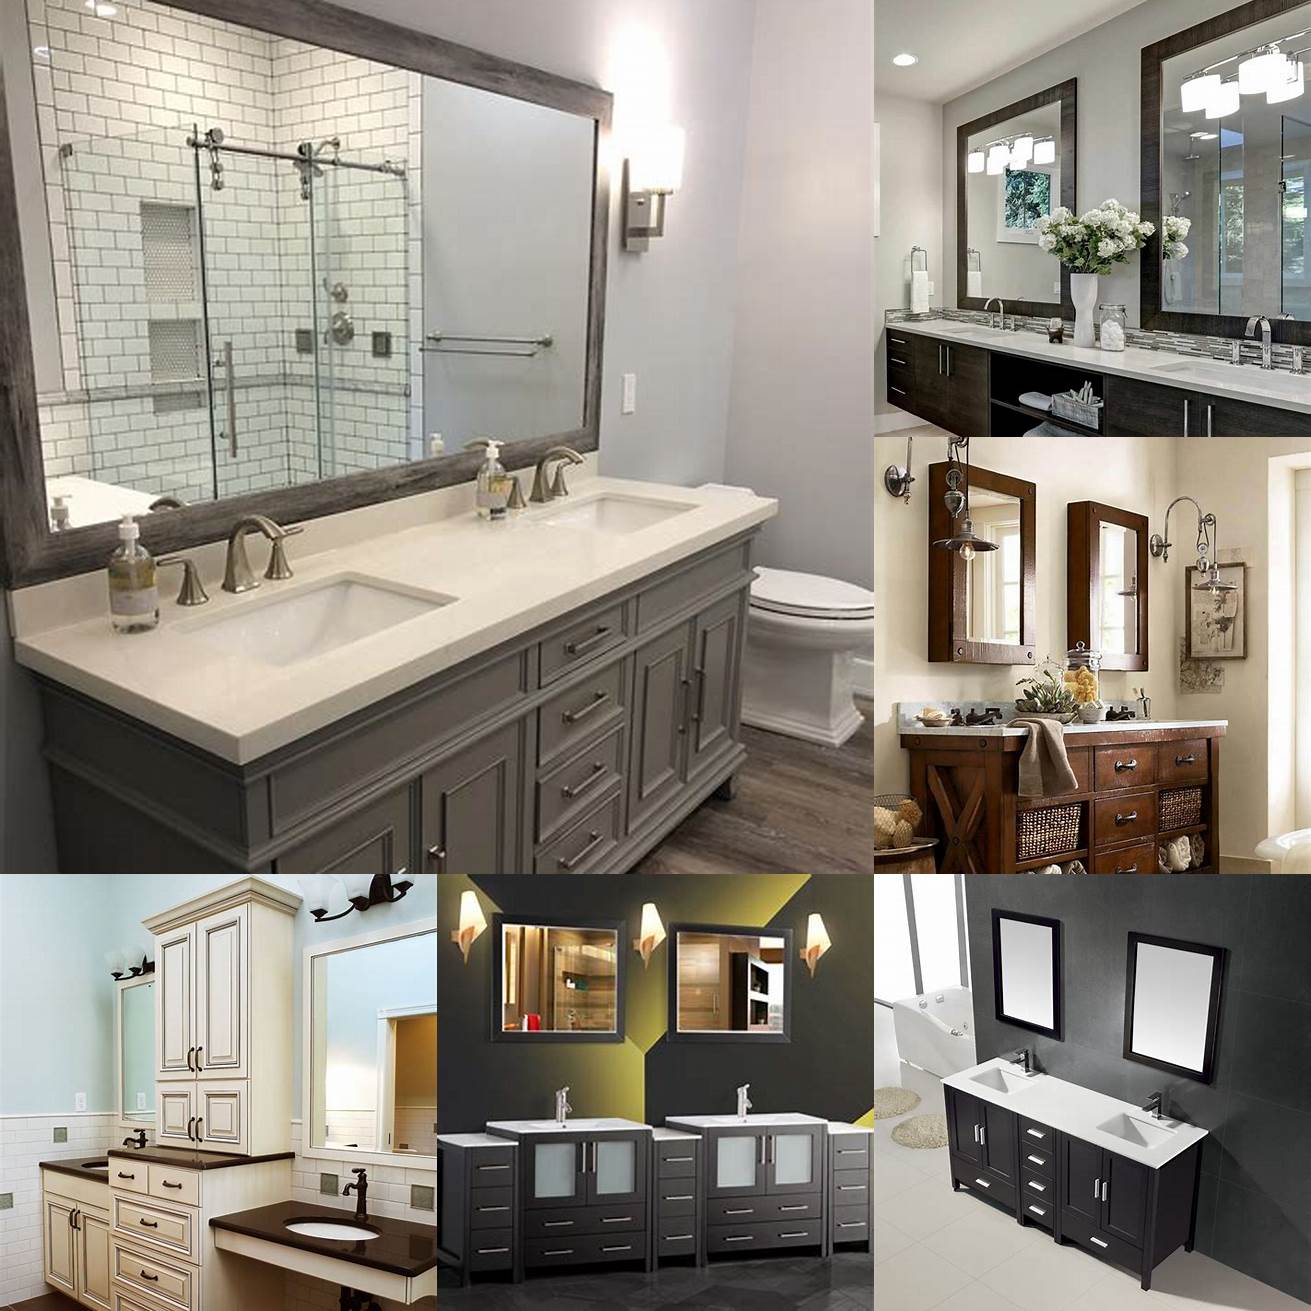 Double vanities are perfect for couples or families who share a bathroom They come in different styles and sizes and they can be made of different materials such as wood metal and glass They provide ample storage space and countertop space However they take up more floor space than other types of vanities